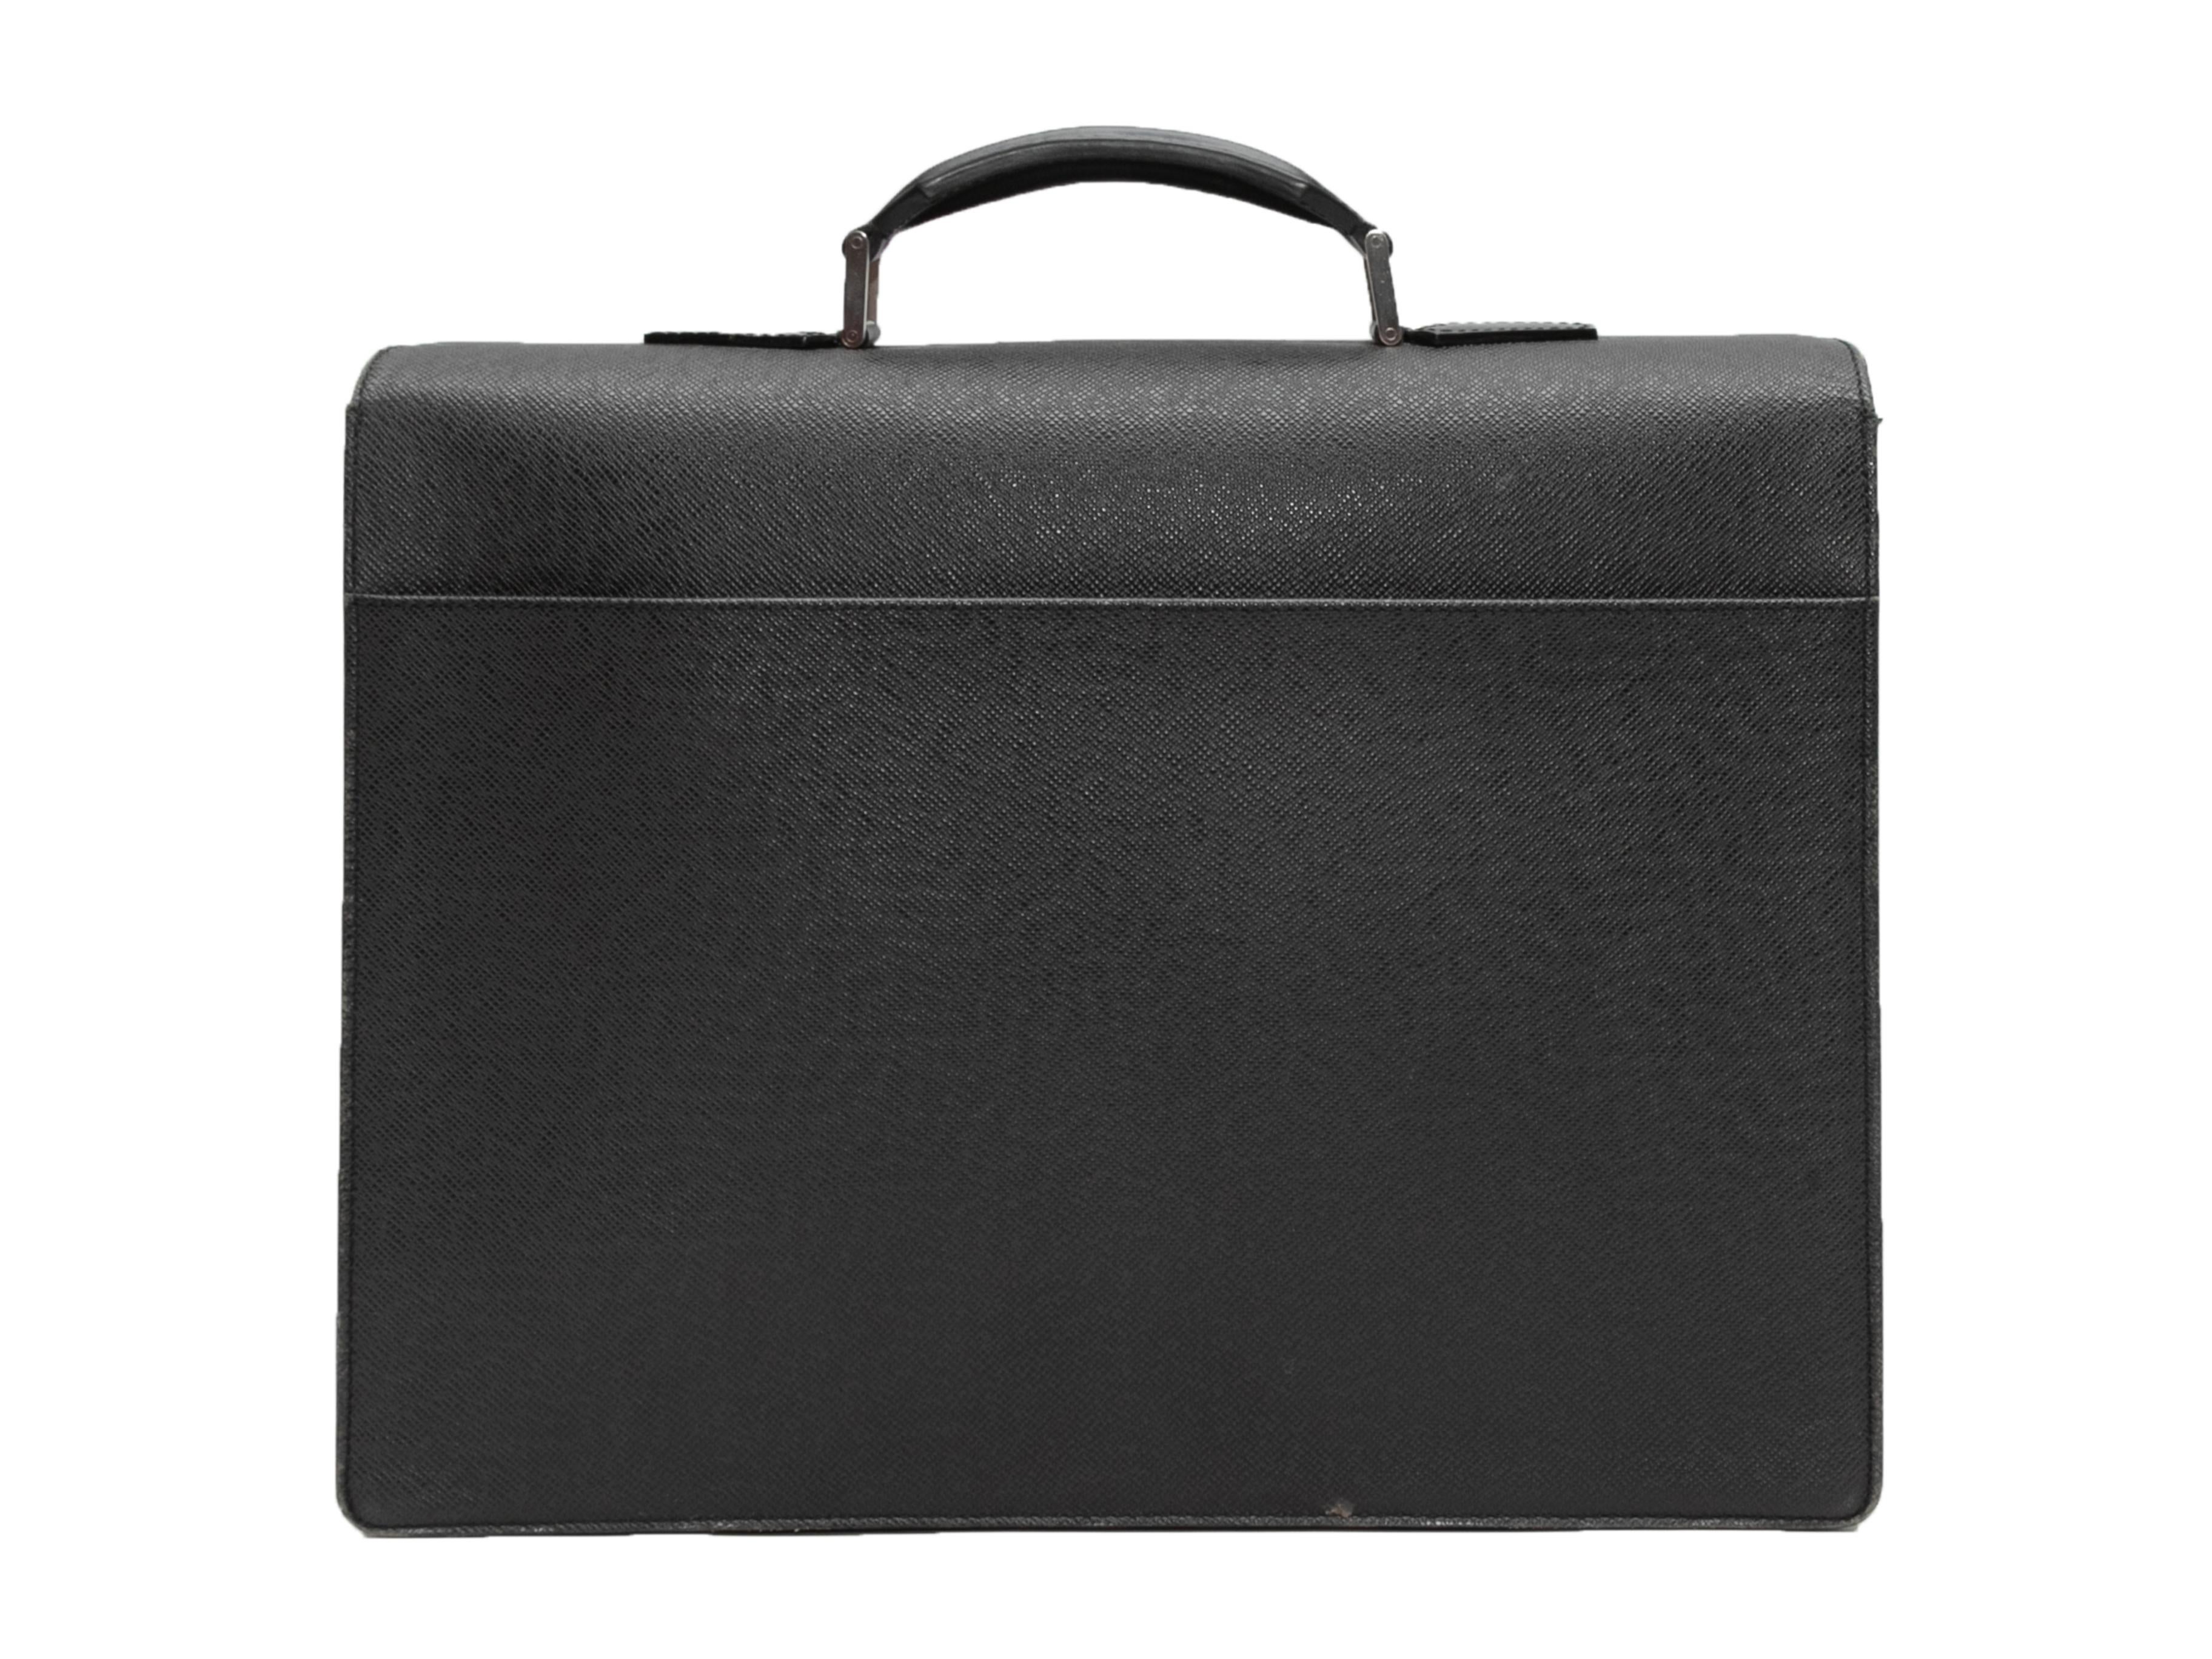 Black Louis Vuitton Leather Briefcase In Good Condition For Sale In New York, NY